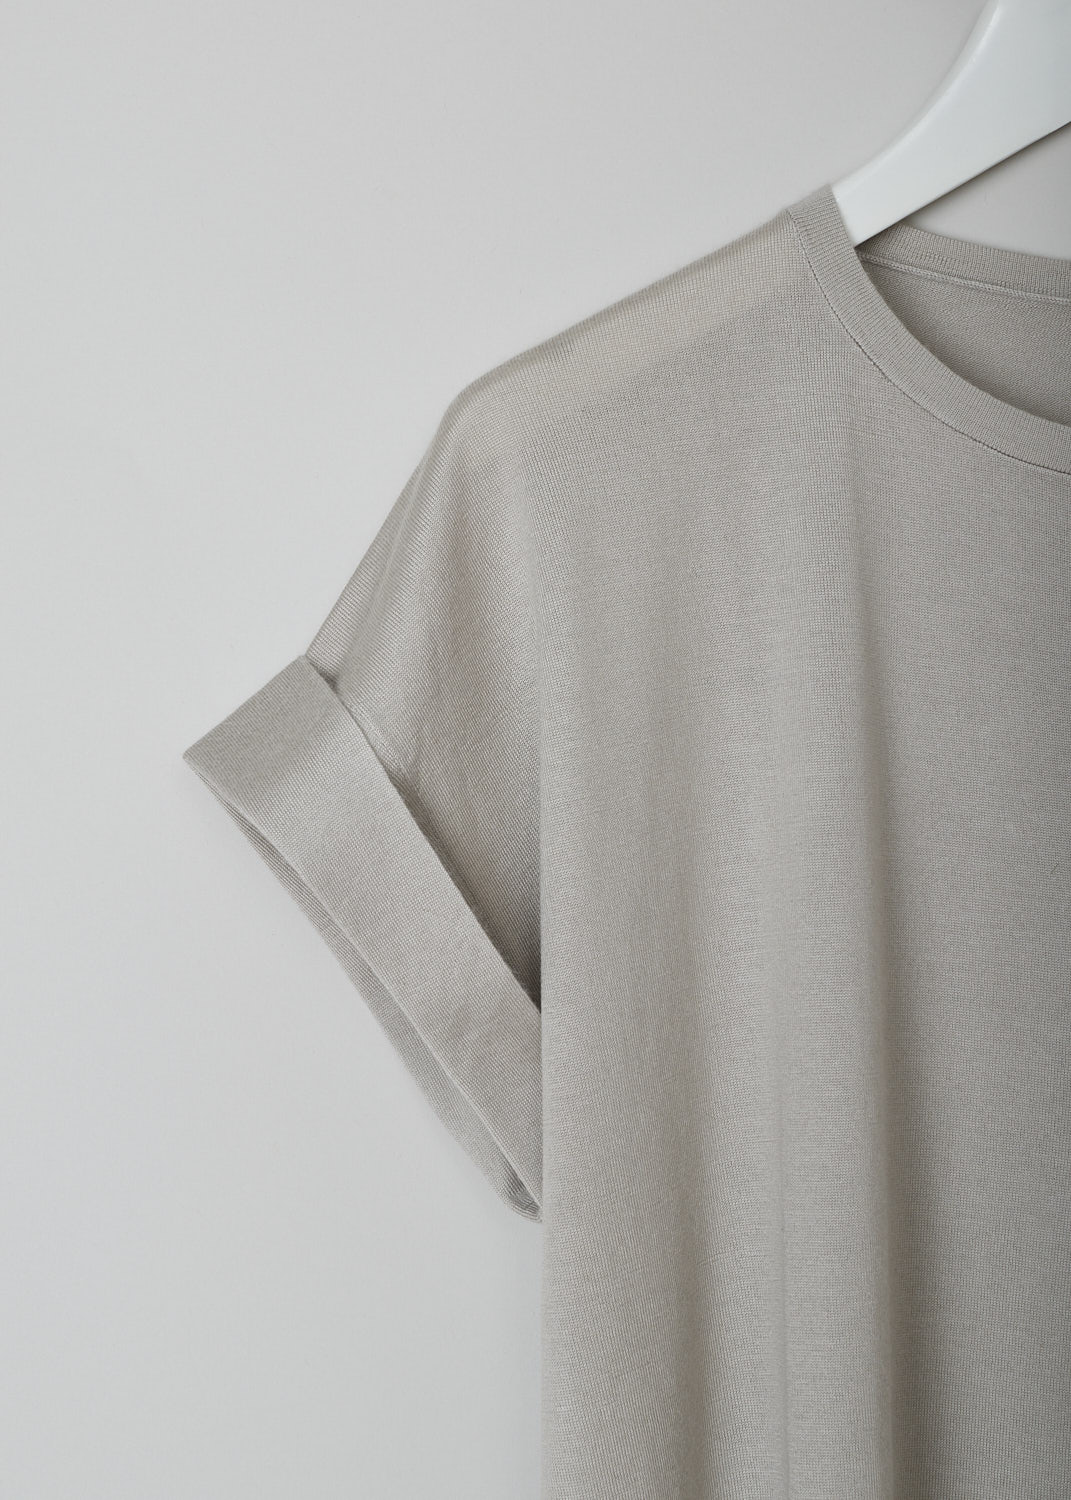 BRUNELLO CUCINELLI, GREY CASHMERE T-SHIRT, M13805900_C2428, Beige, Grey, Detail, This pebble grey cashmere top has a round neckline and short folded sleeves. The top has a straight hemline. 
